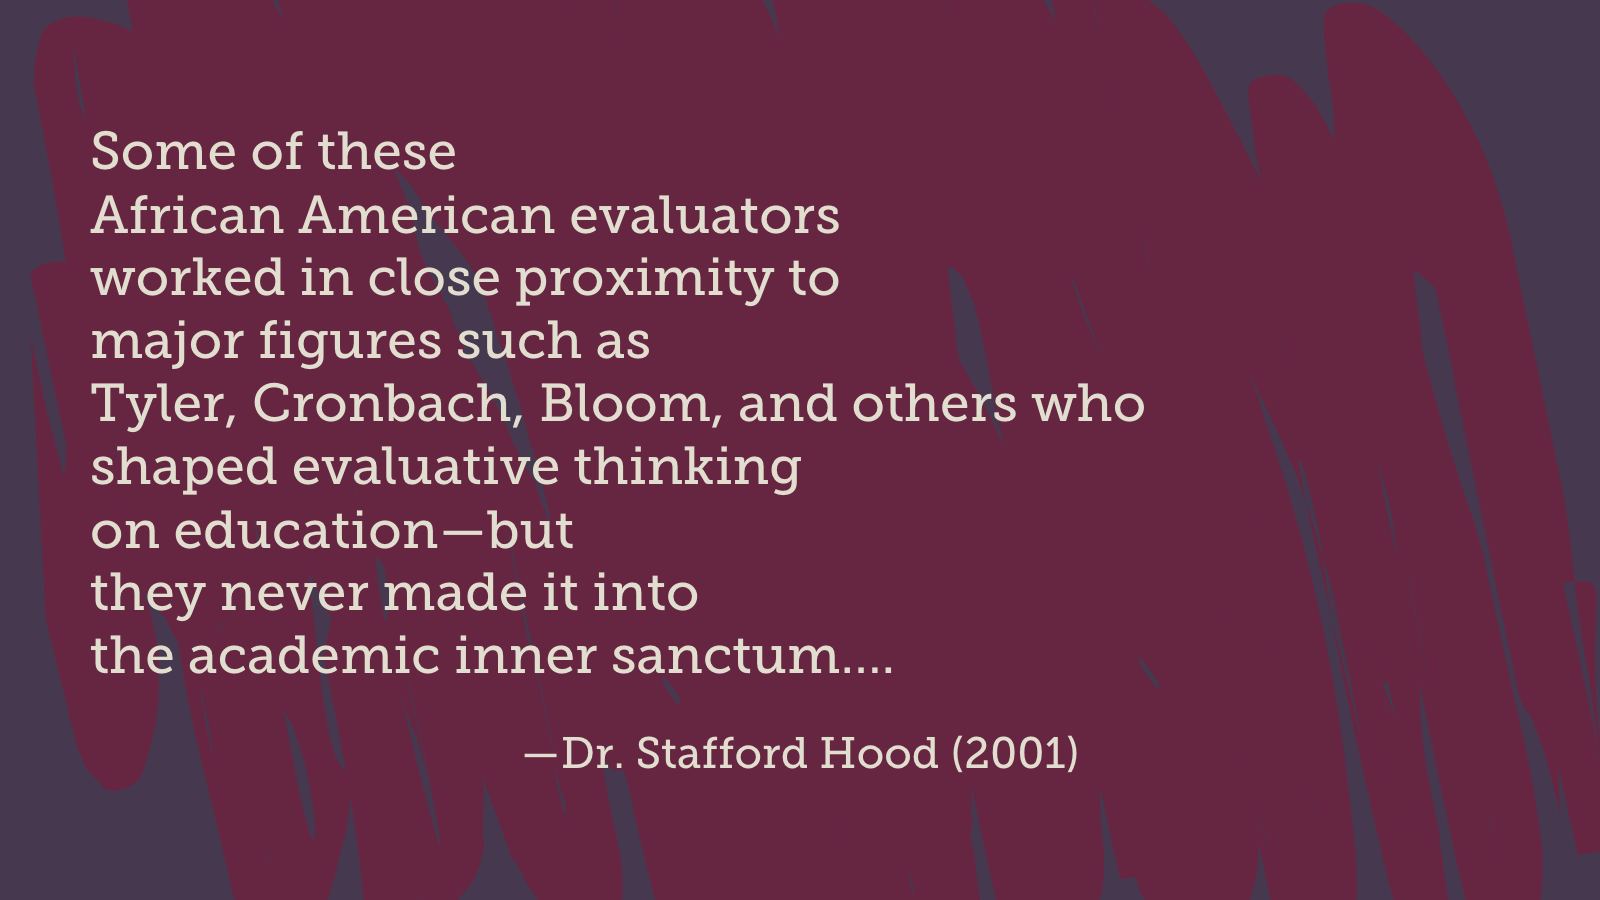 Some of these African American evaluators worked in close proximity to major figures such as Tyler, Cronbach, Bloom, and others who shaped evaluative thinking on education—but they never made it into the academic inner sanctum…. (Dr. Stafford Hood, 2001)